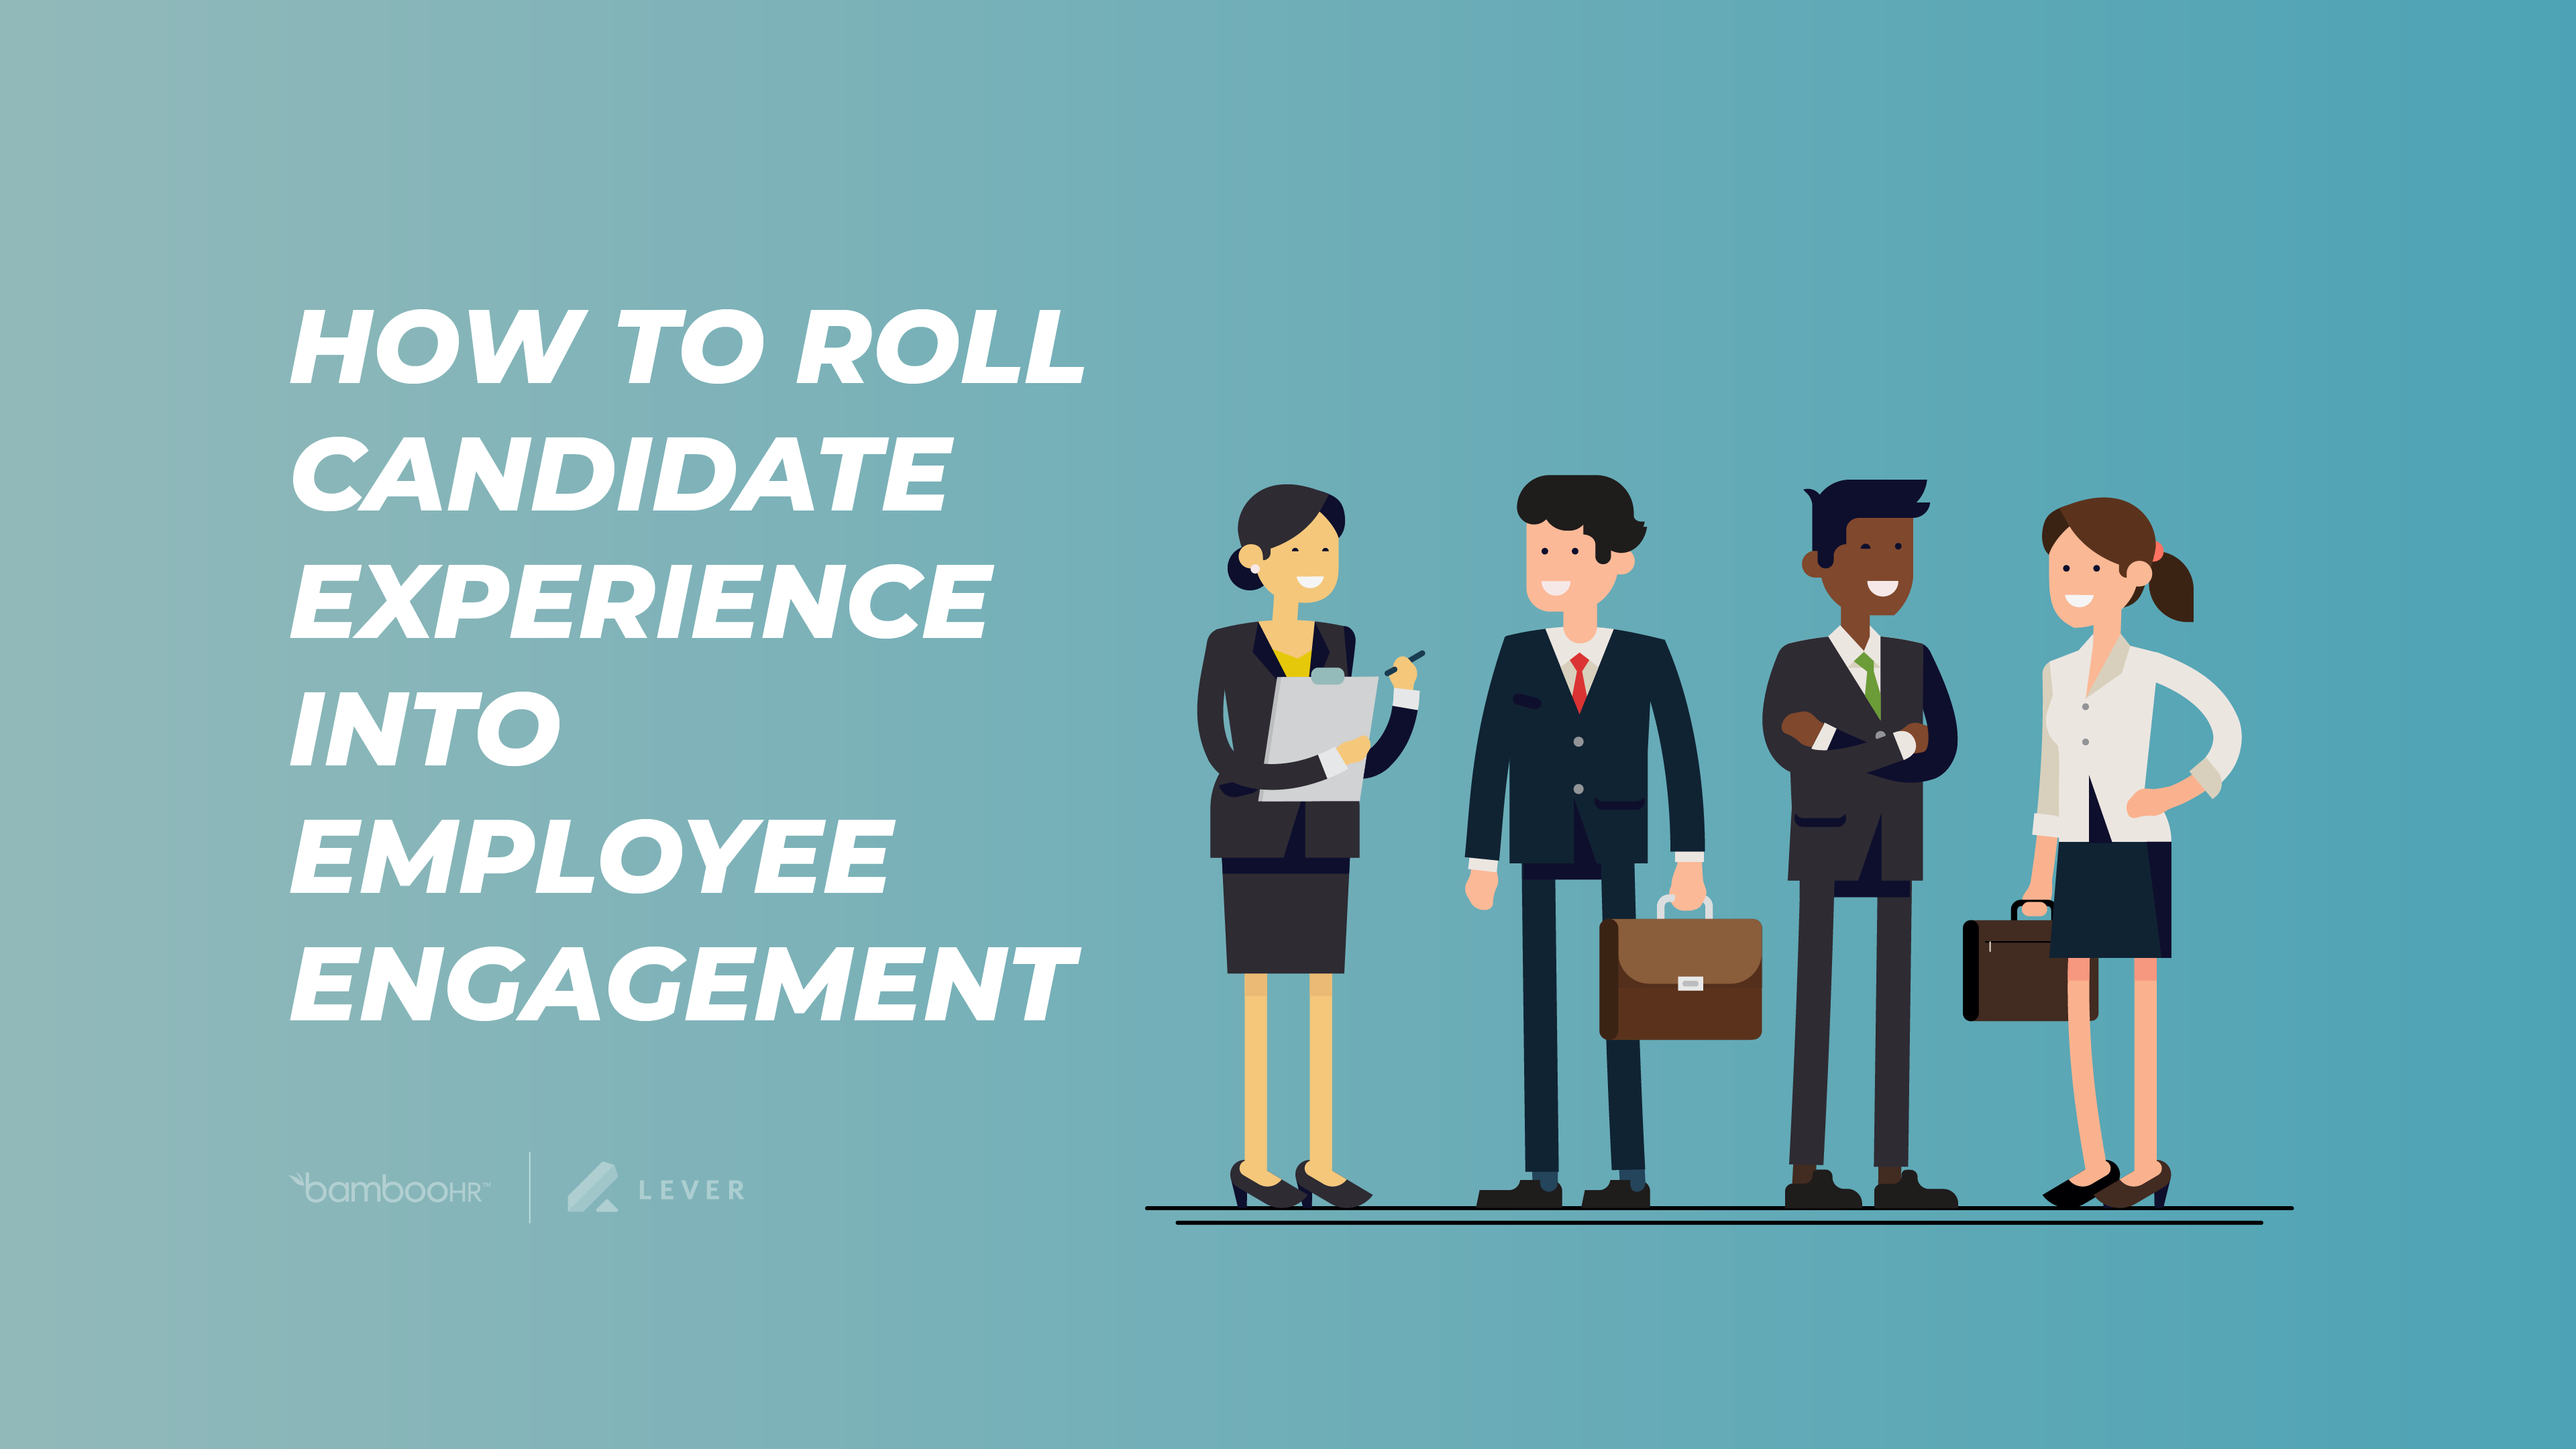 How to Roll Candidate Experience into Employee Engagement